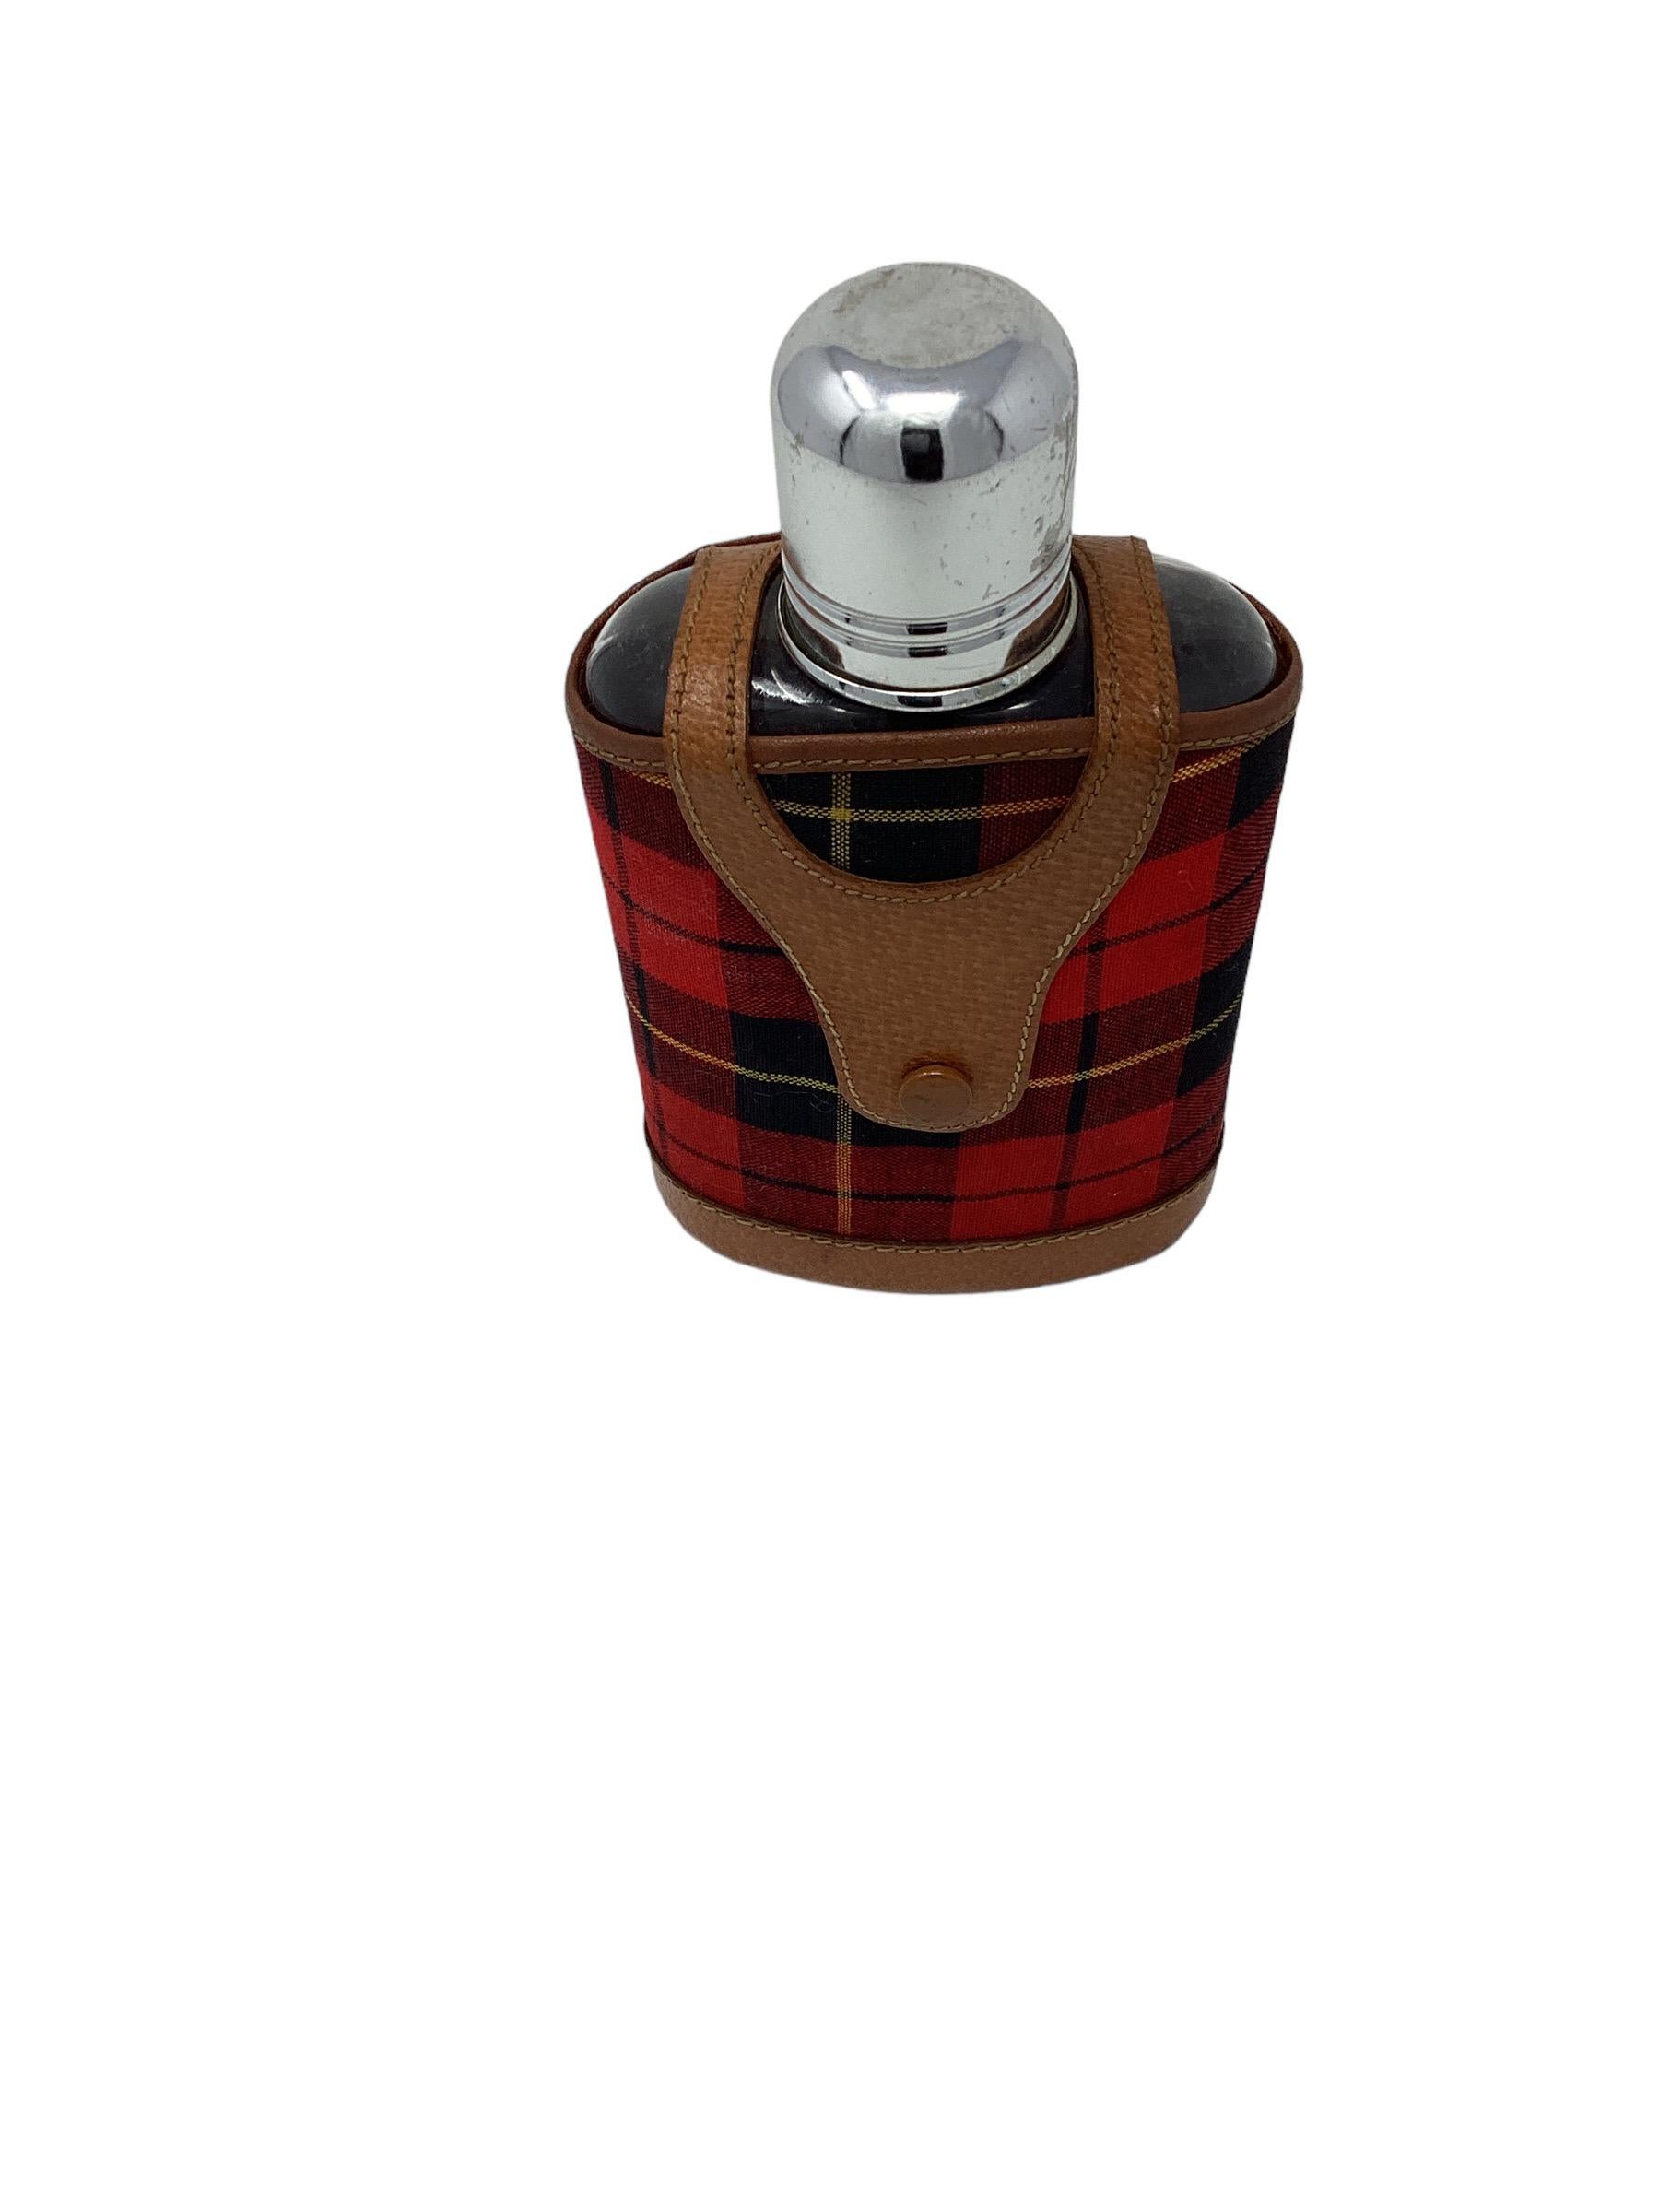 Vintage Hip Flask with Tartan and Leather Cover  In Good Condition For Sale In Chapel Hill, NC